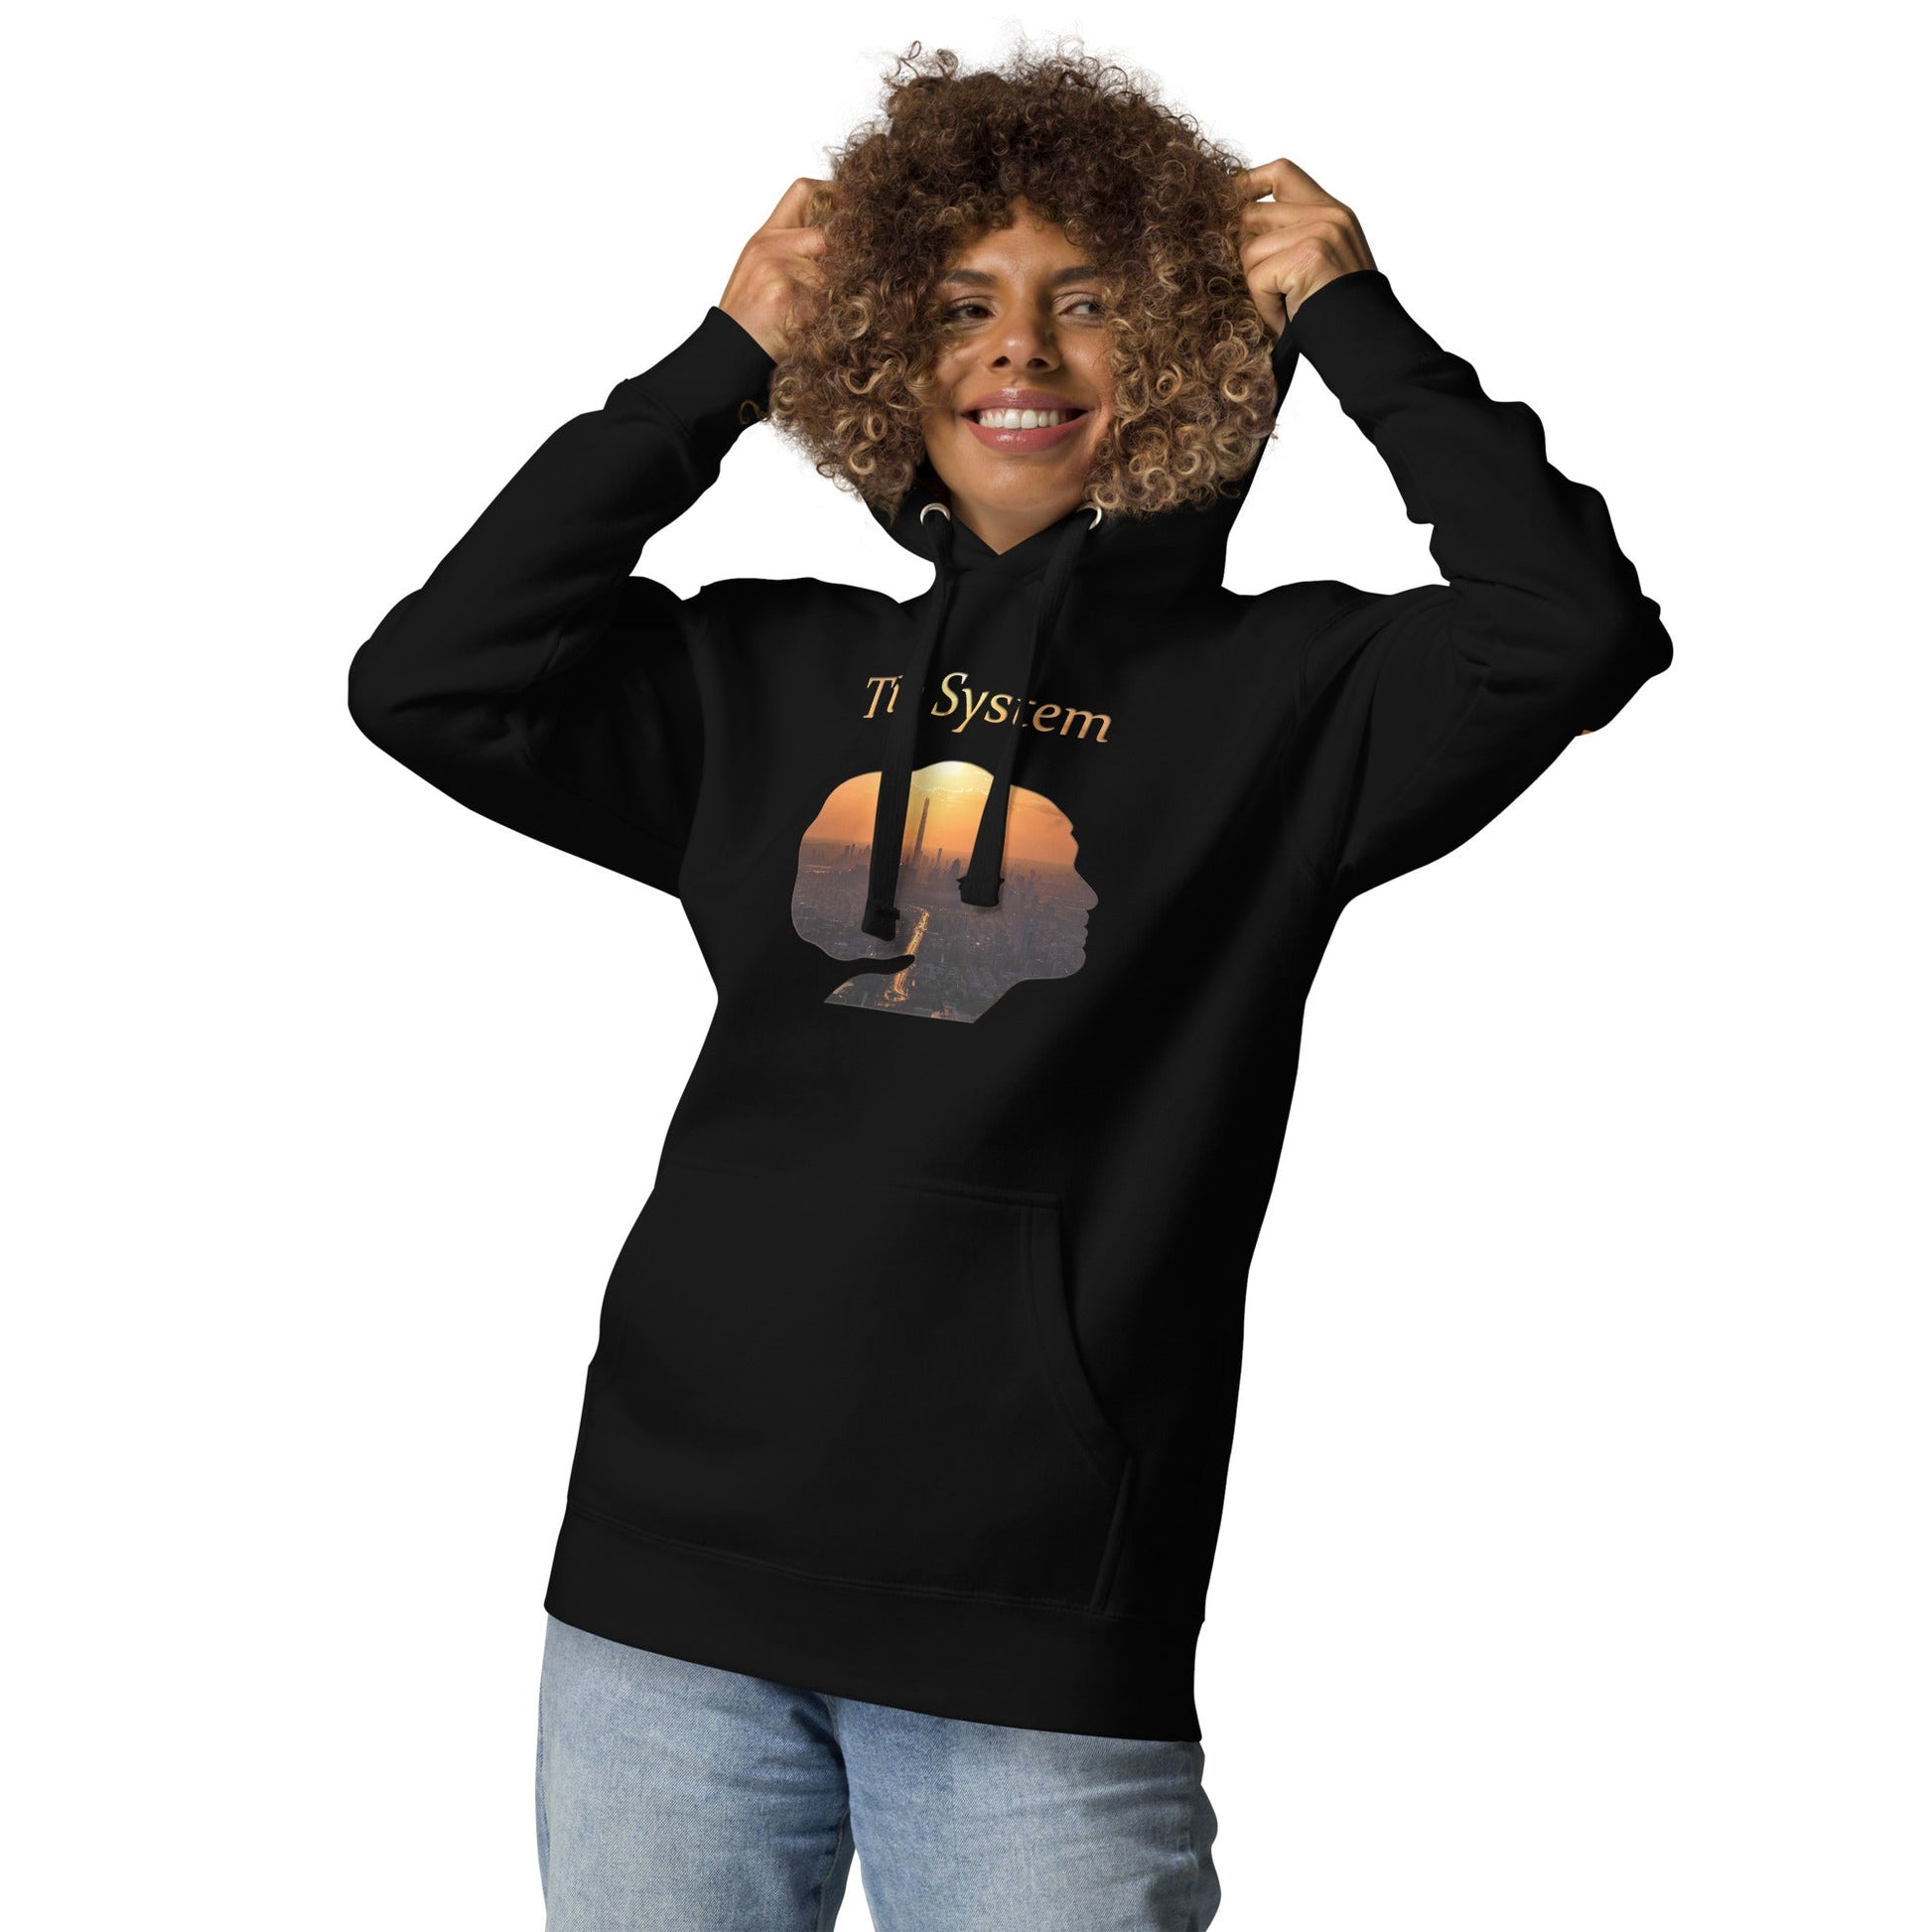 THE SYSTEM: Unisex Hoodie - SEVAD MUSIC HOUSE - Hoodie - SEVAD MUSIC HOUSE - 7977061_10779 - Black - S - THE SYSTEM: Unisex Hoodie